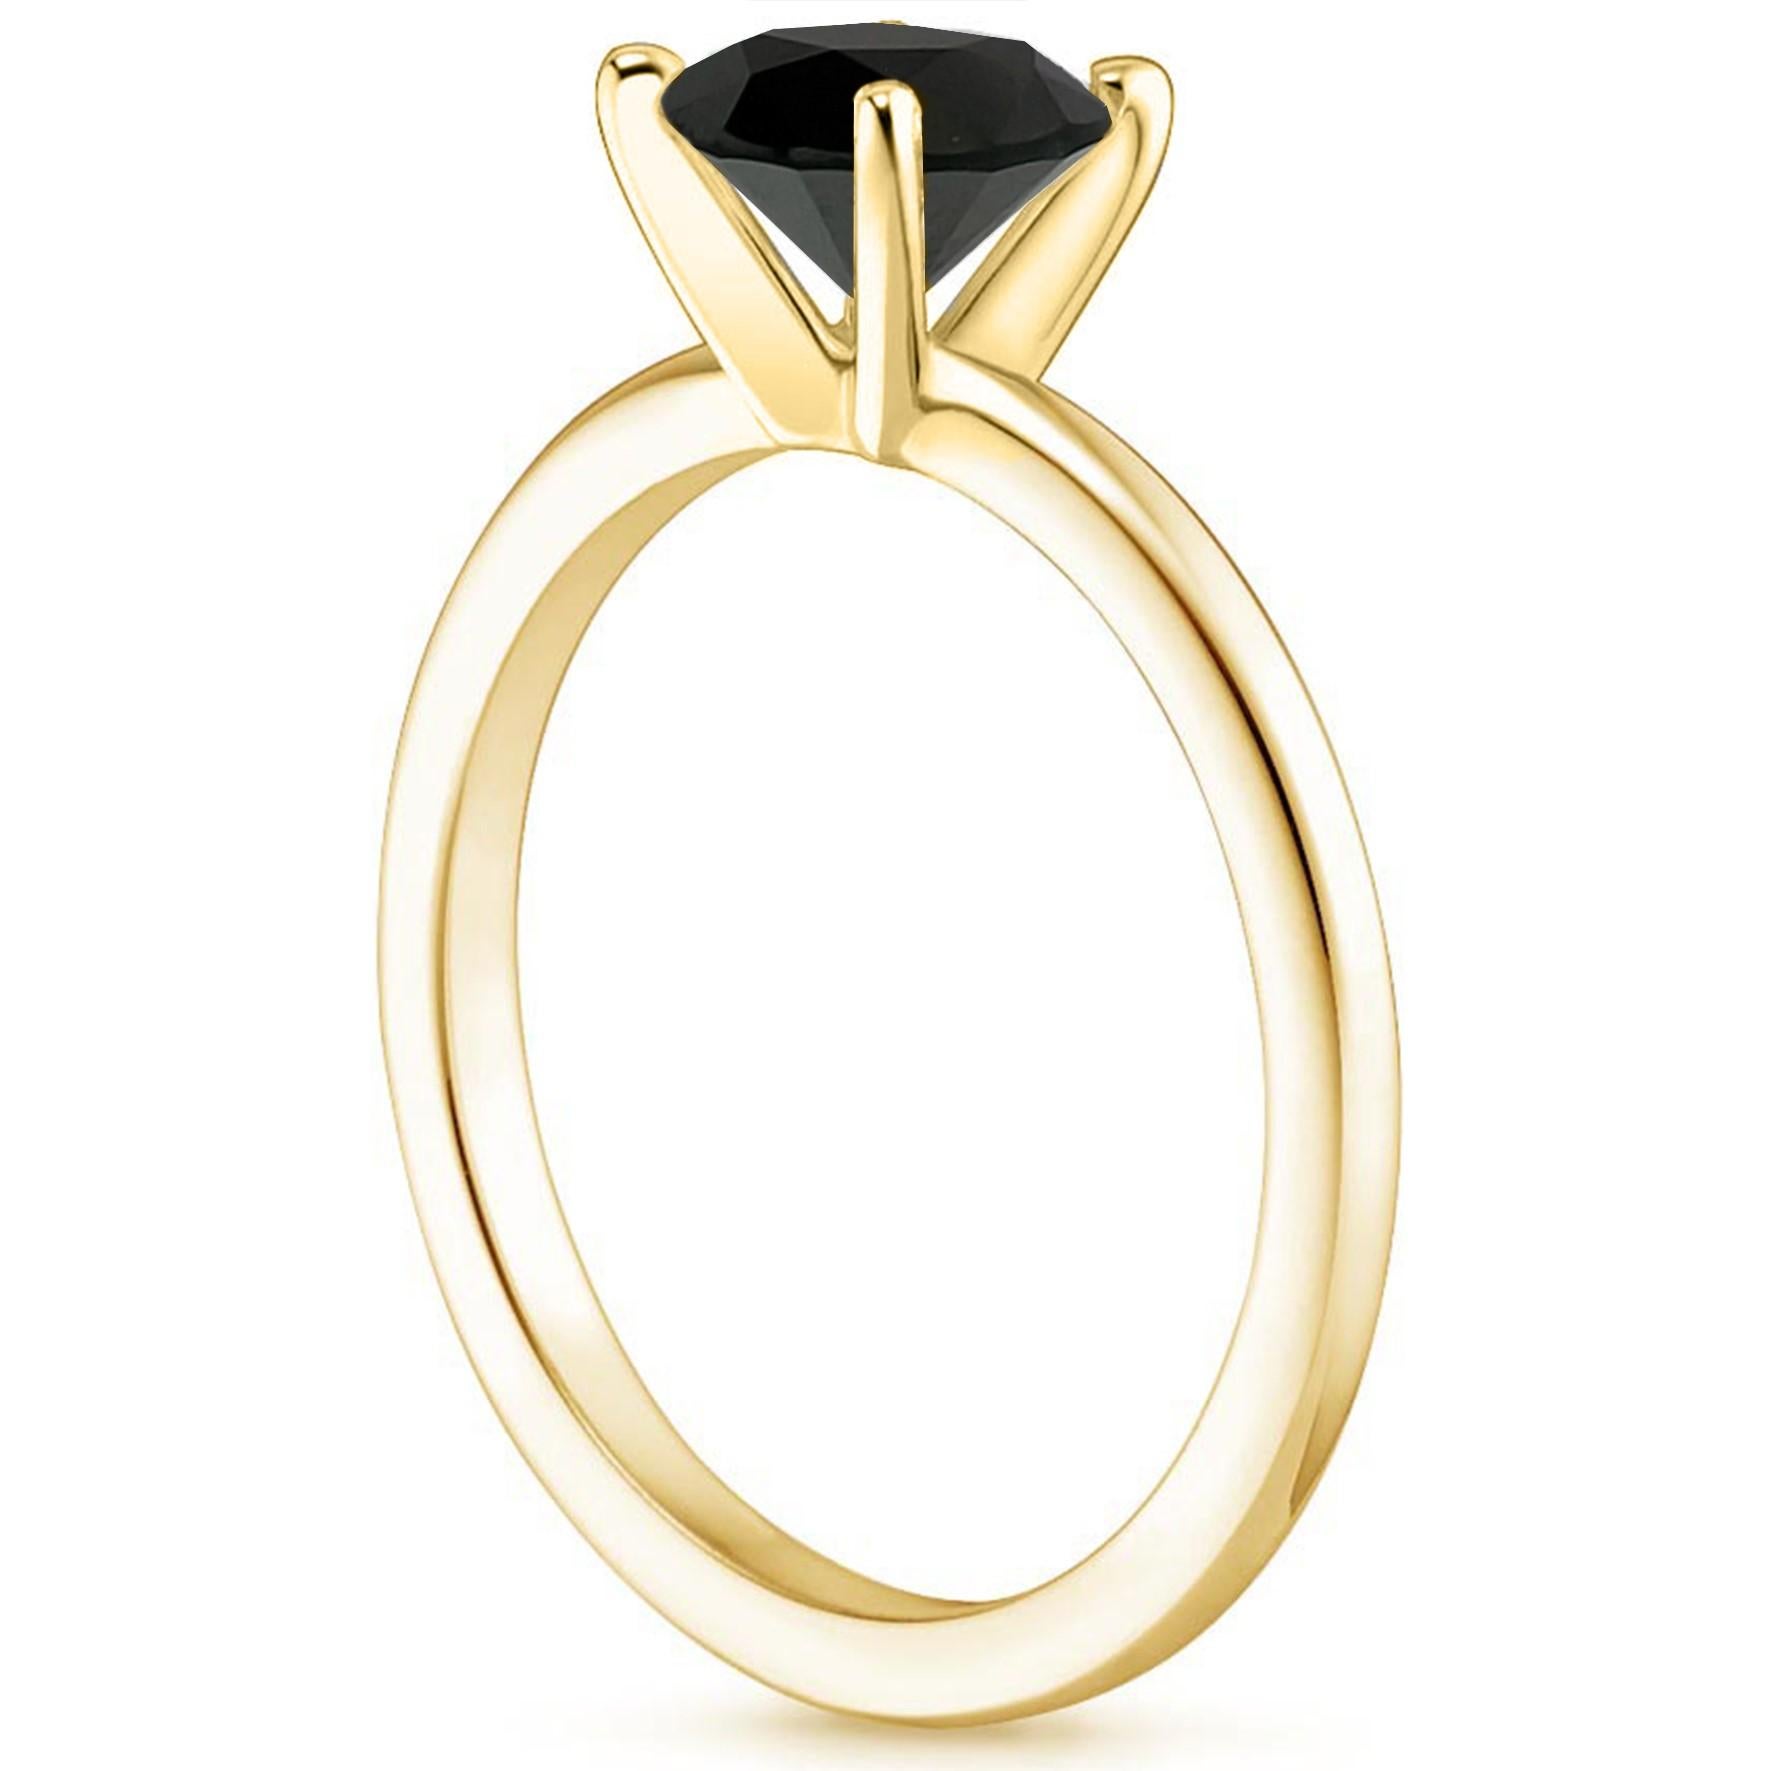 Contemporary 3.22 Carat Round Black Diamond Solitaire Ring in 14K Yellow Gold For Sale